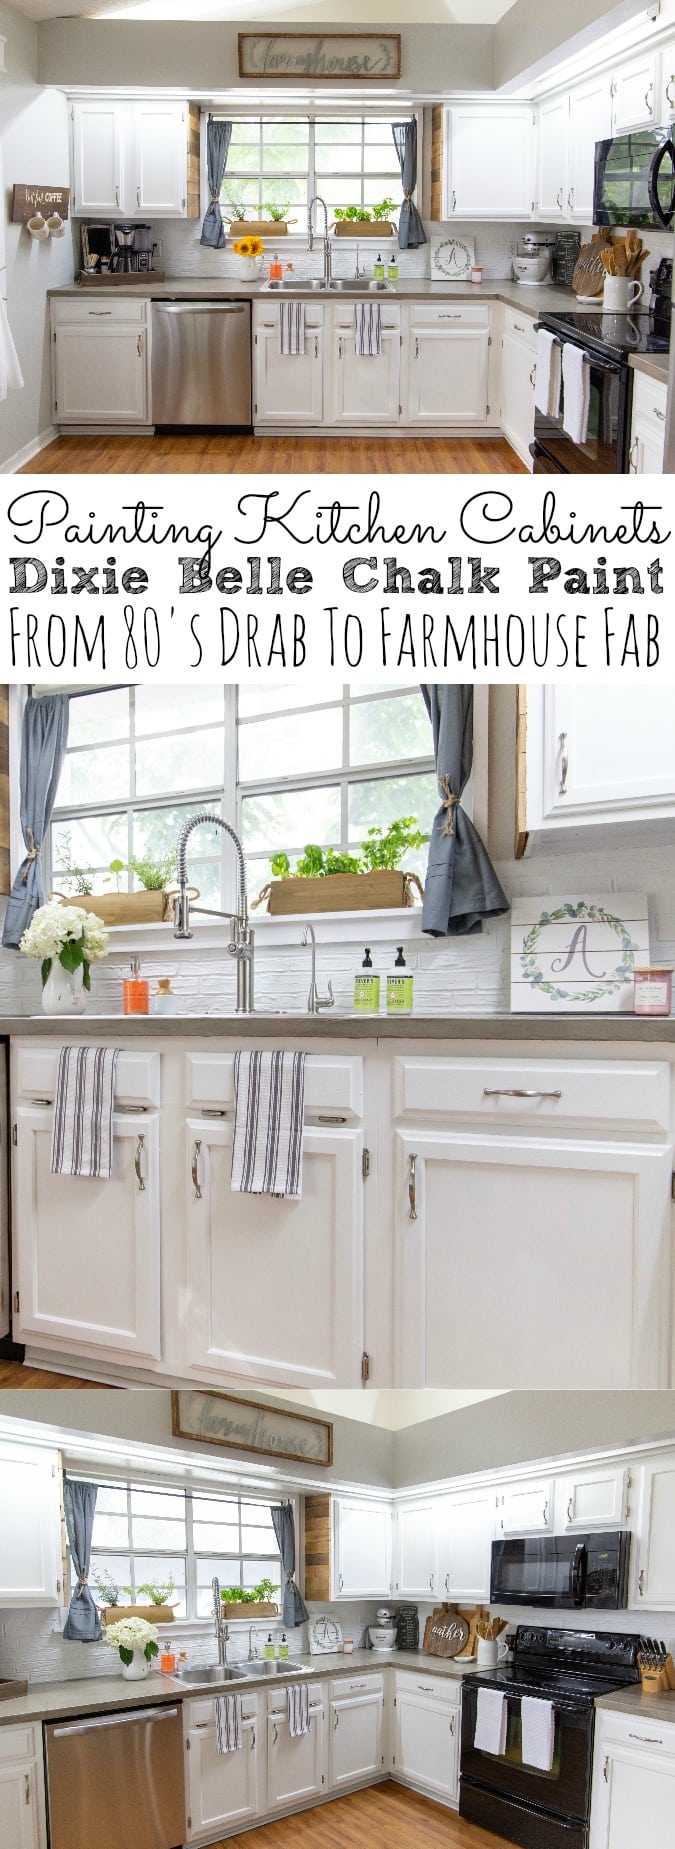 Painting Kitchen Cabinets With Chalk Paint From Dixie Belle | From 80's Drab To Farmhouse Fab - simplytodaylife.com.jpg